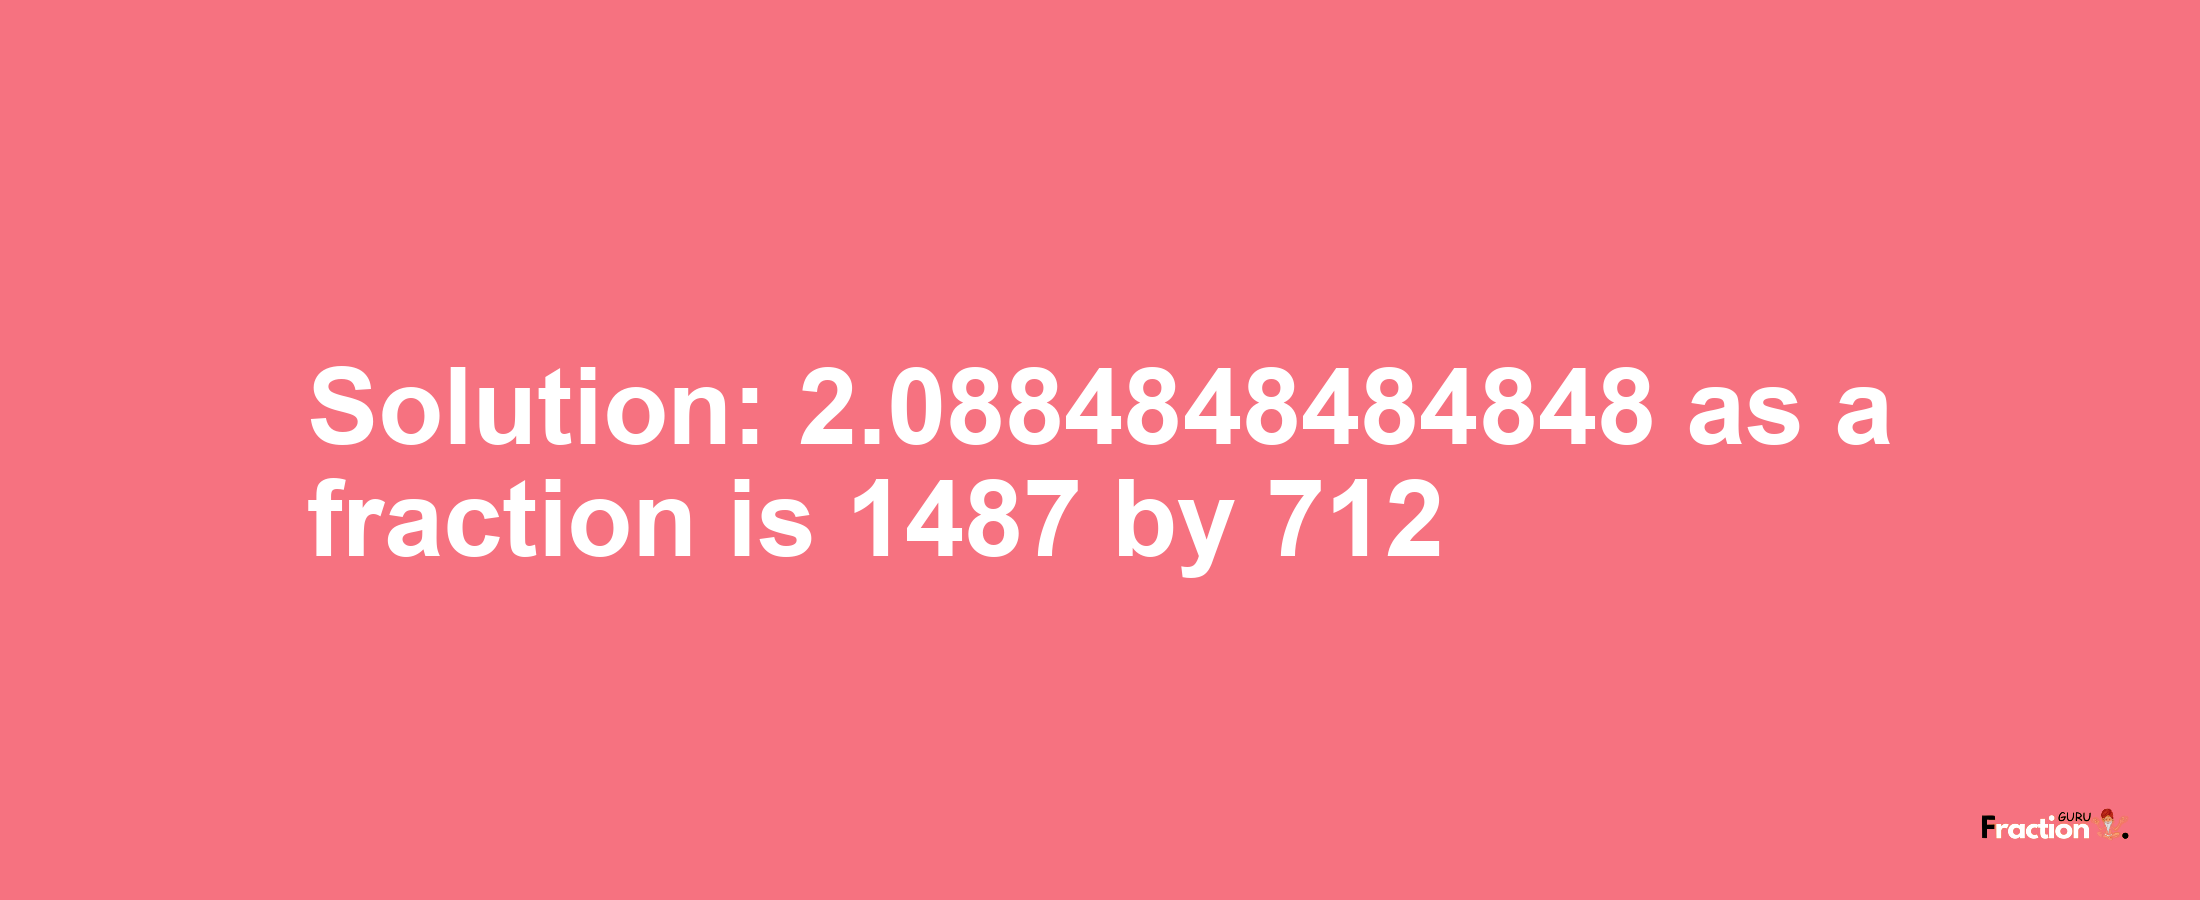 Solution:2.0884848484848 as a fraction is 1487/712